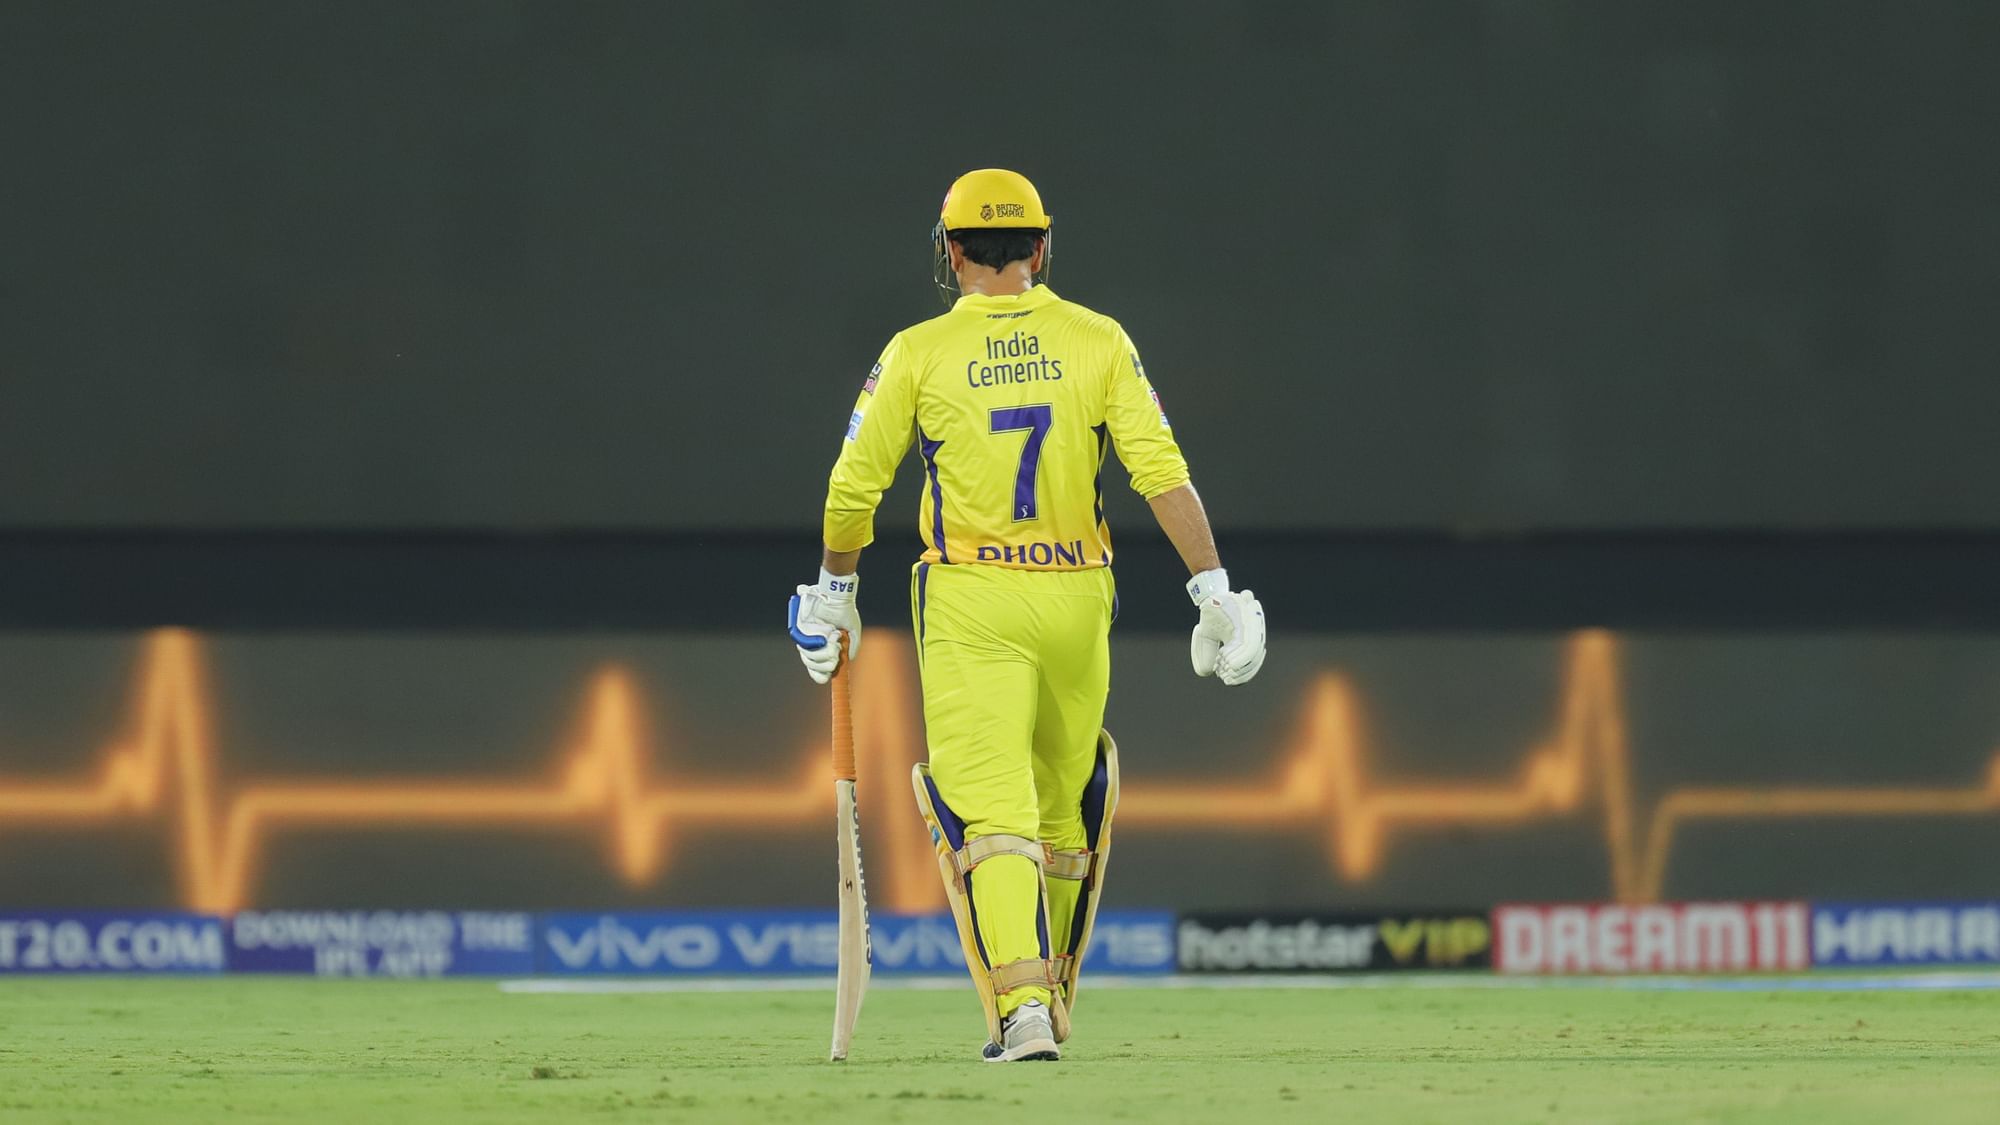 MS Dhoni walks back to the pavilion after getting run out on 2 in the 2019 IPL final